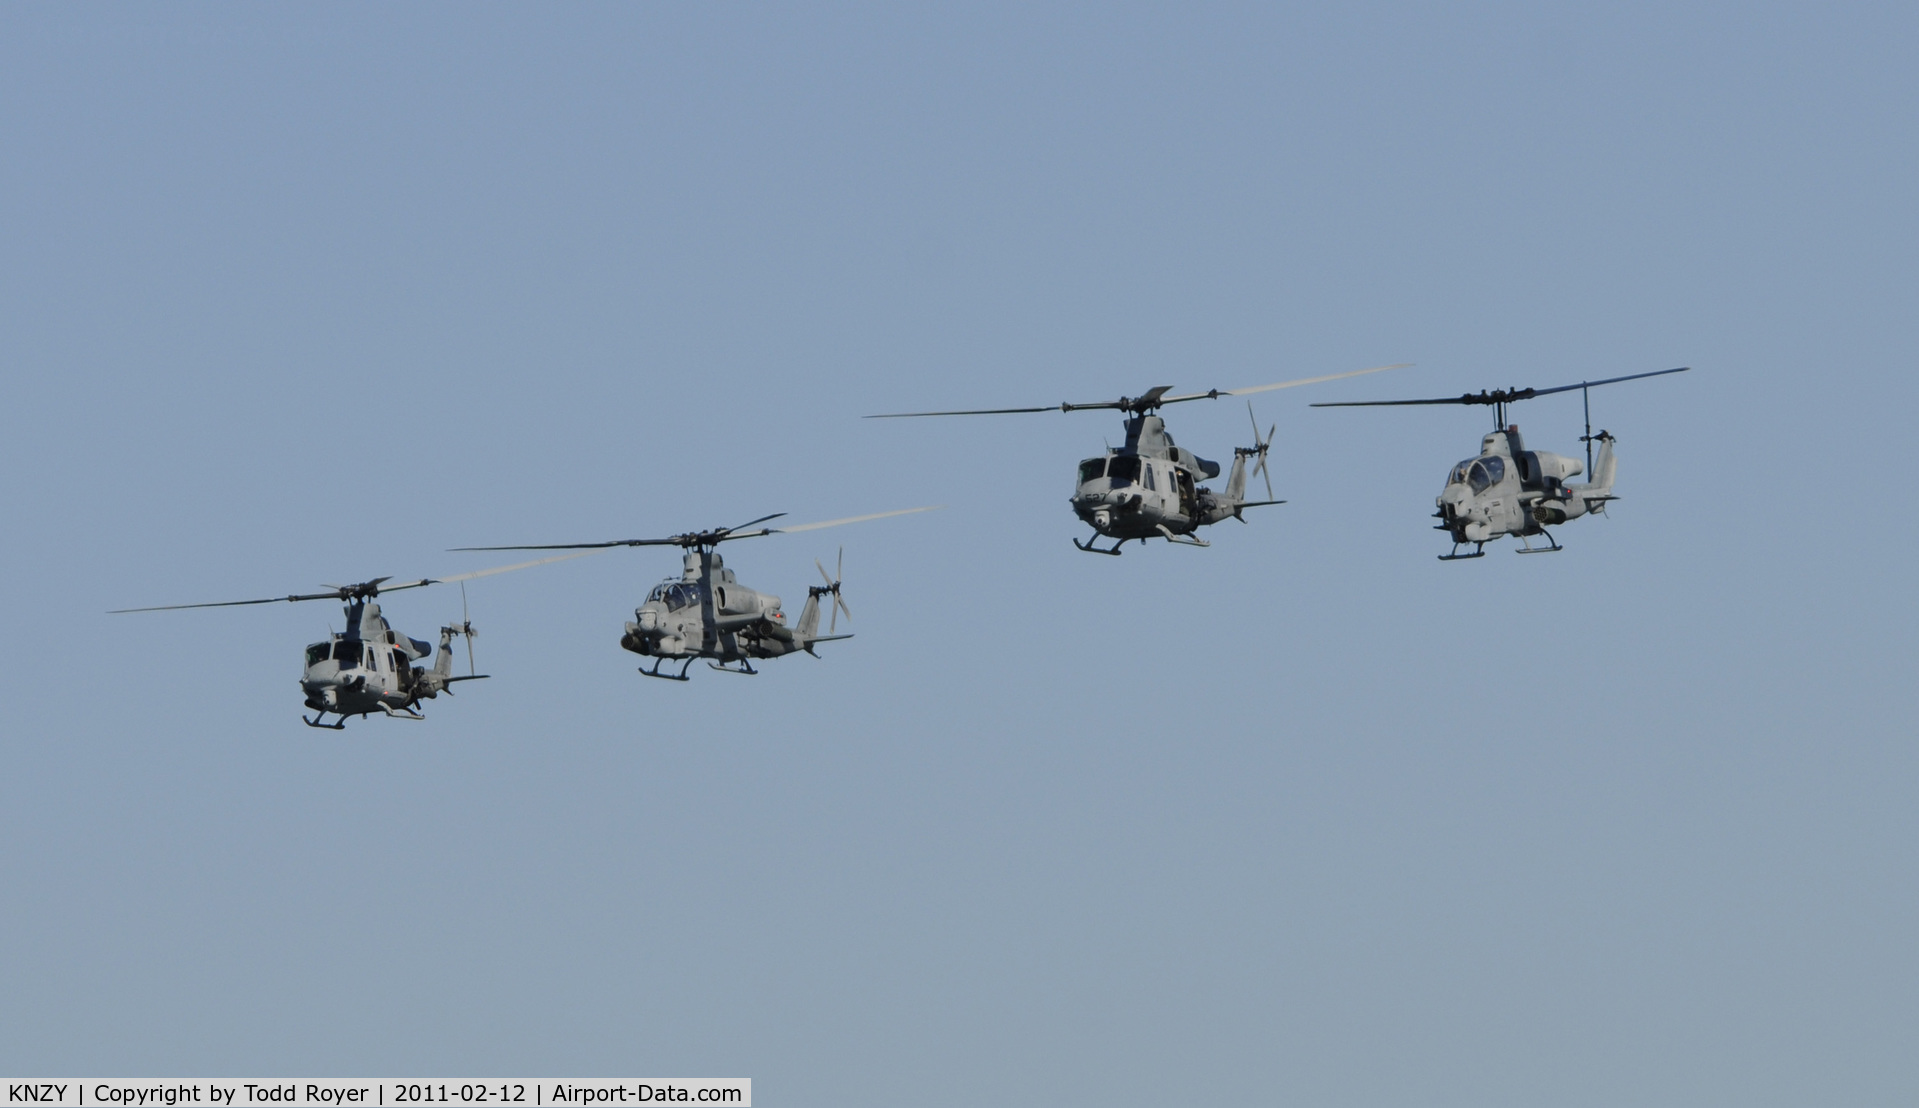 North Island Nas /halsey Field/ Airport (NZY) - Cobras and Hueys from the Marines